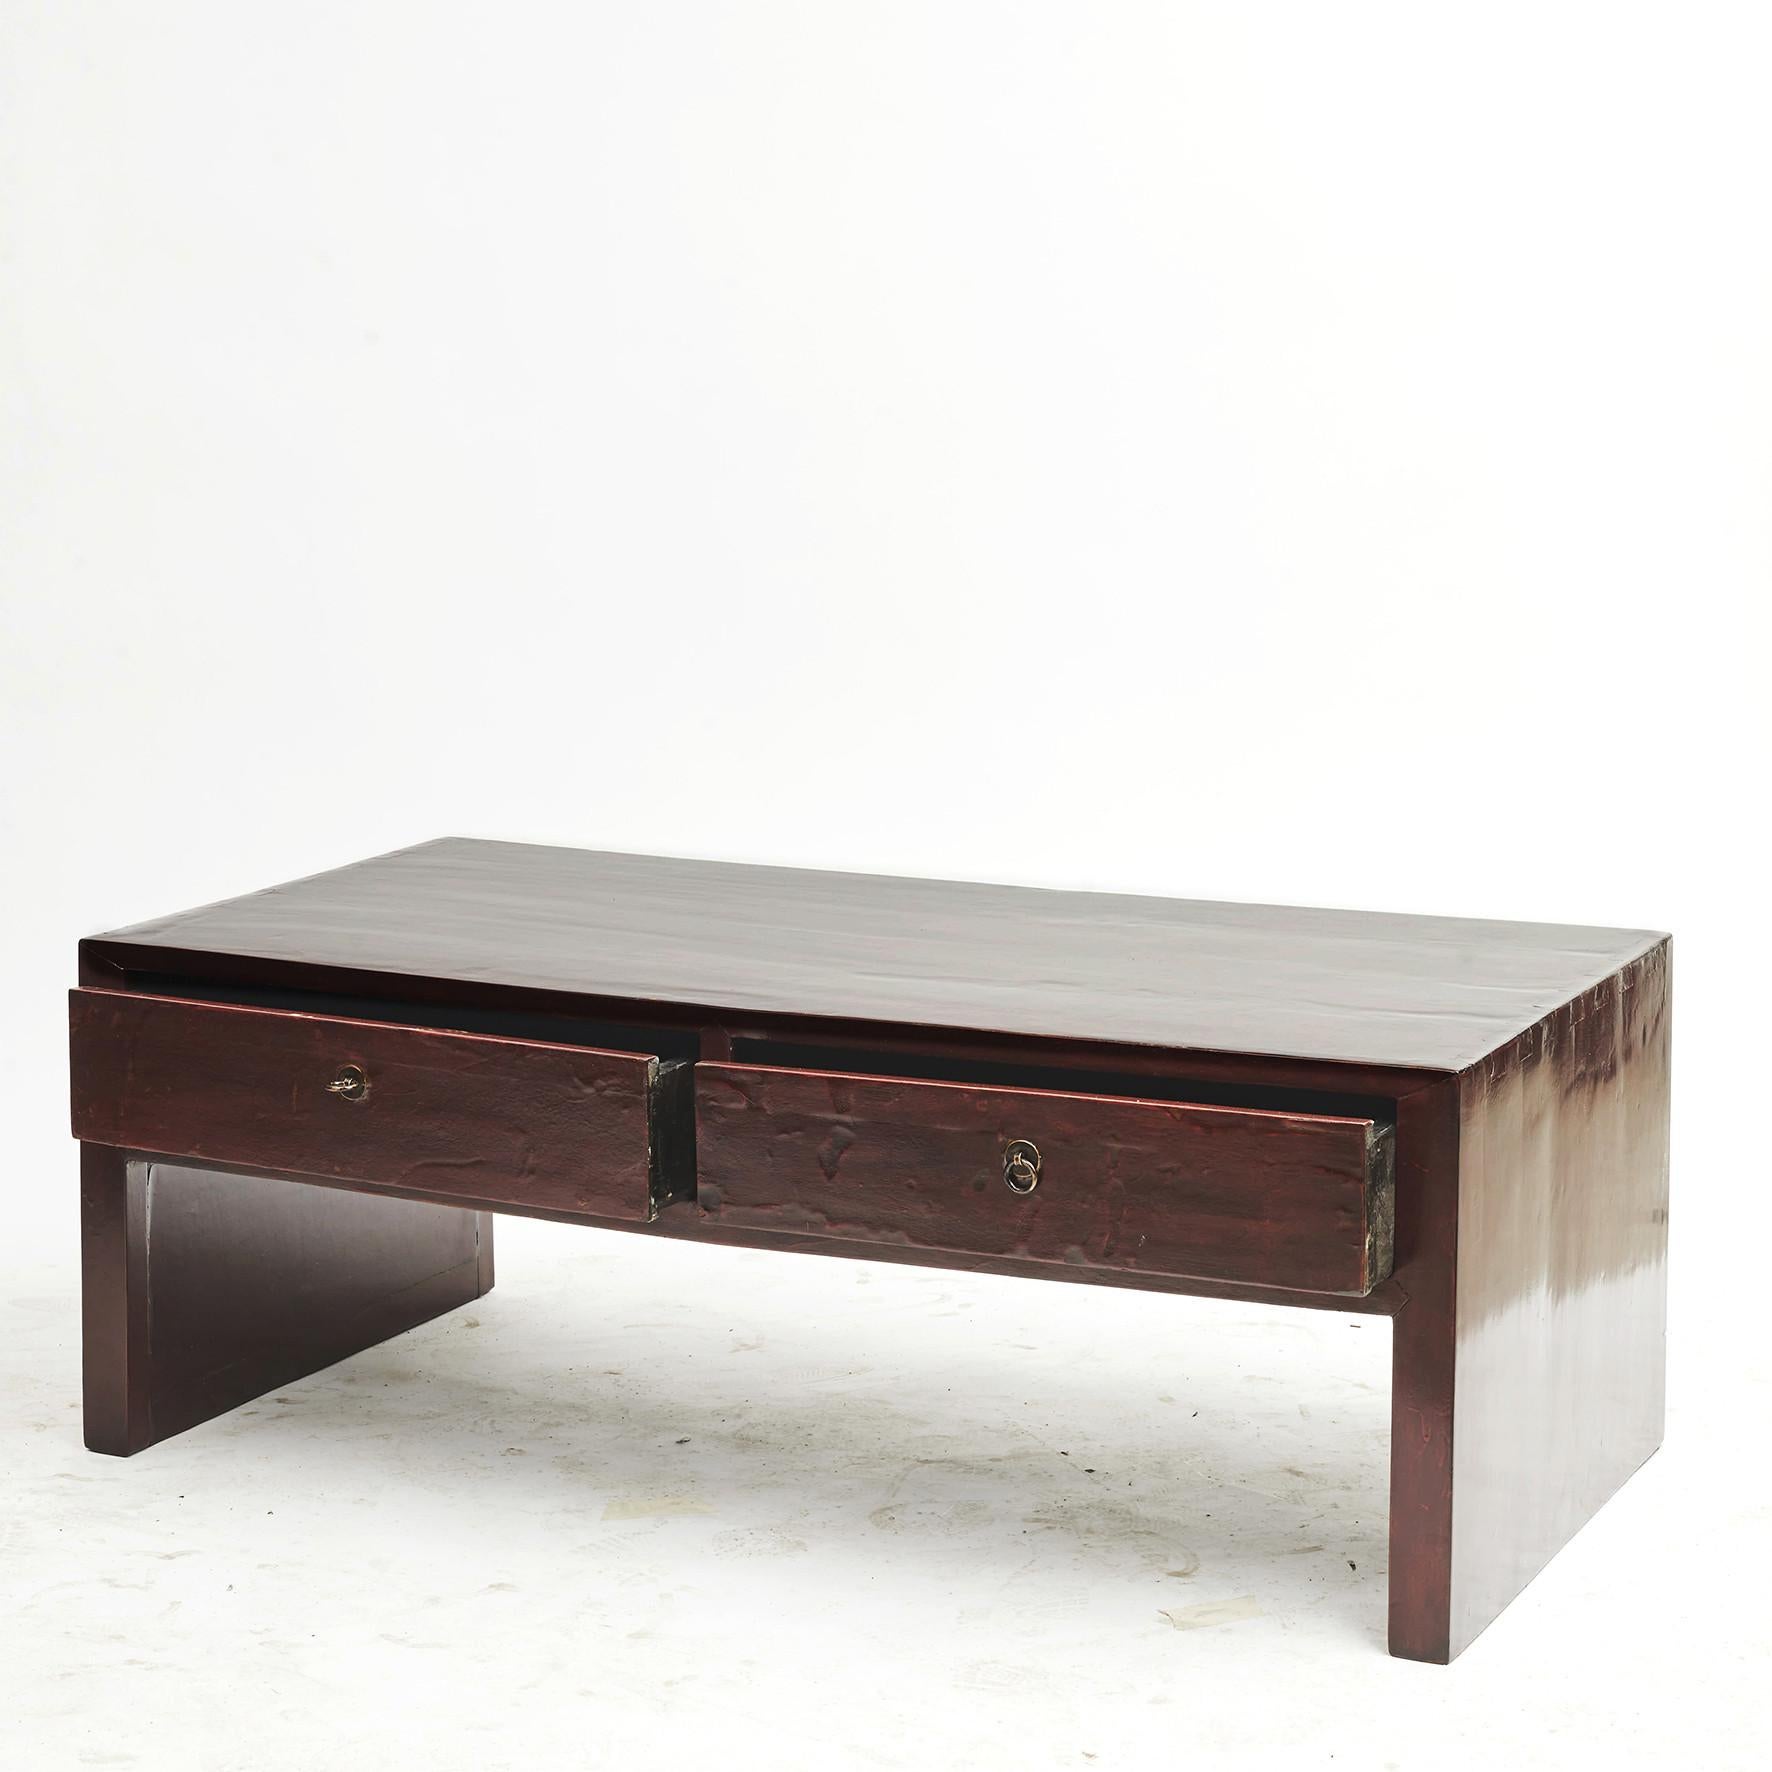 Chinese Art Deco coffee table with two sliding drawer that can be opened from both sides.
Original oxblood lacquer.
Jiangsu, China, 1910-1920.